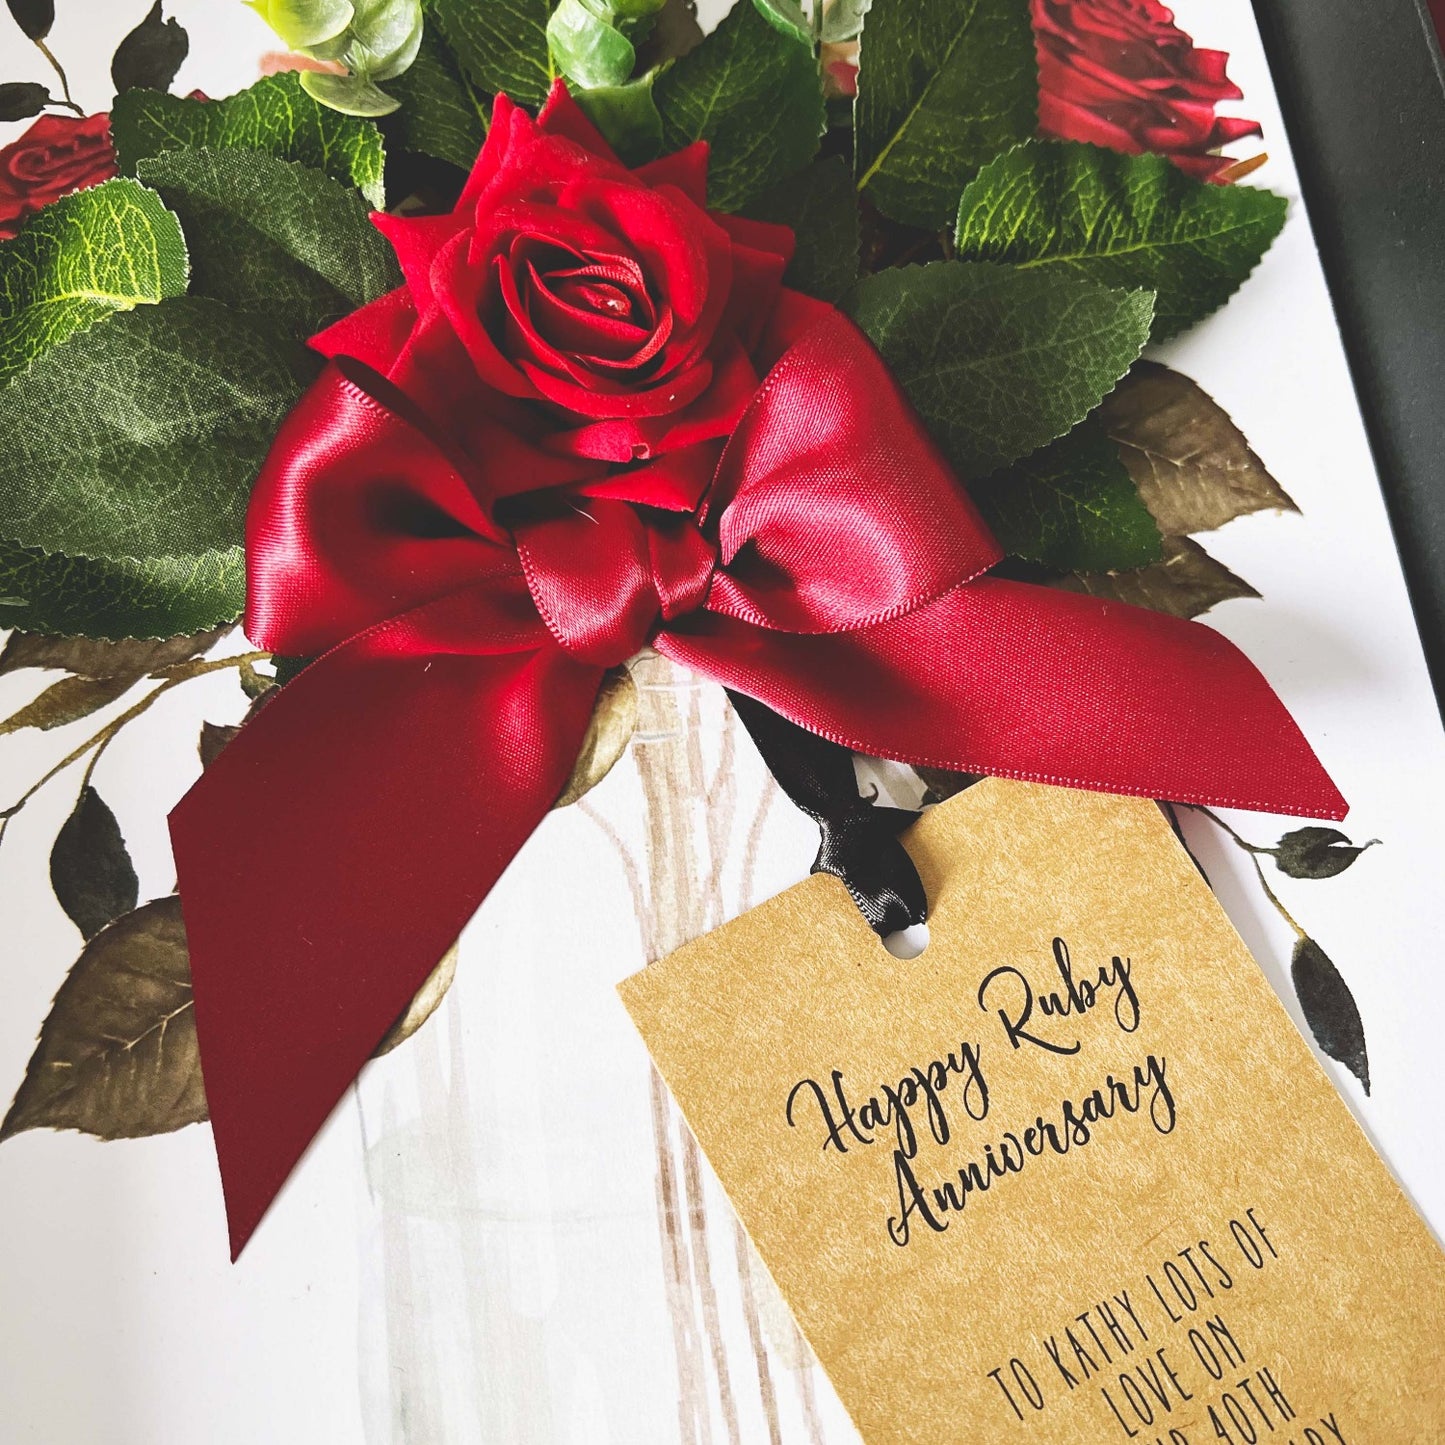 The Best Gift for a 40th ANNIVERSARY | RUBY - Bloom Scented Ruby Anniversary Velvet Rose Boxed Card